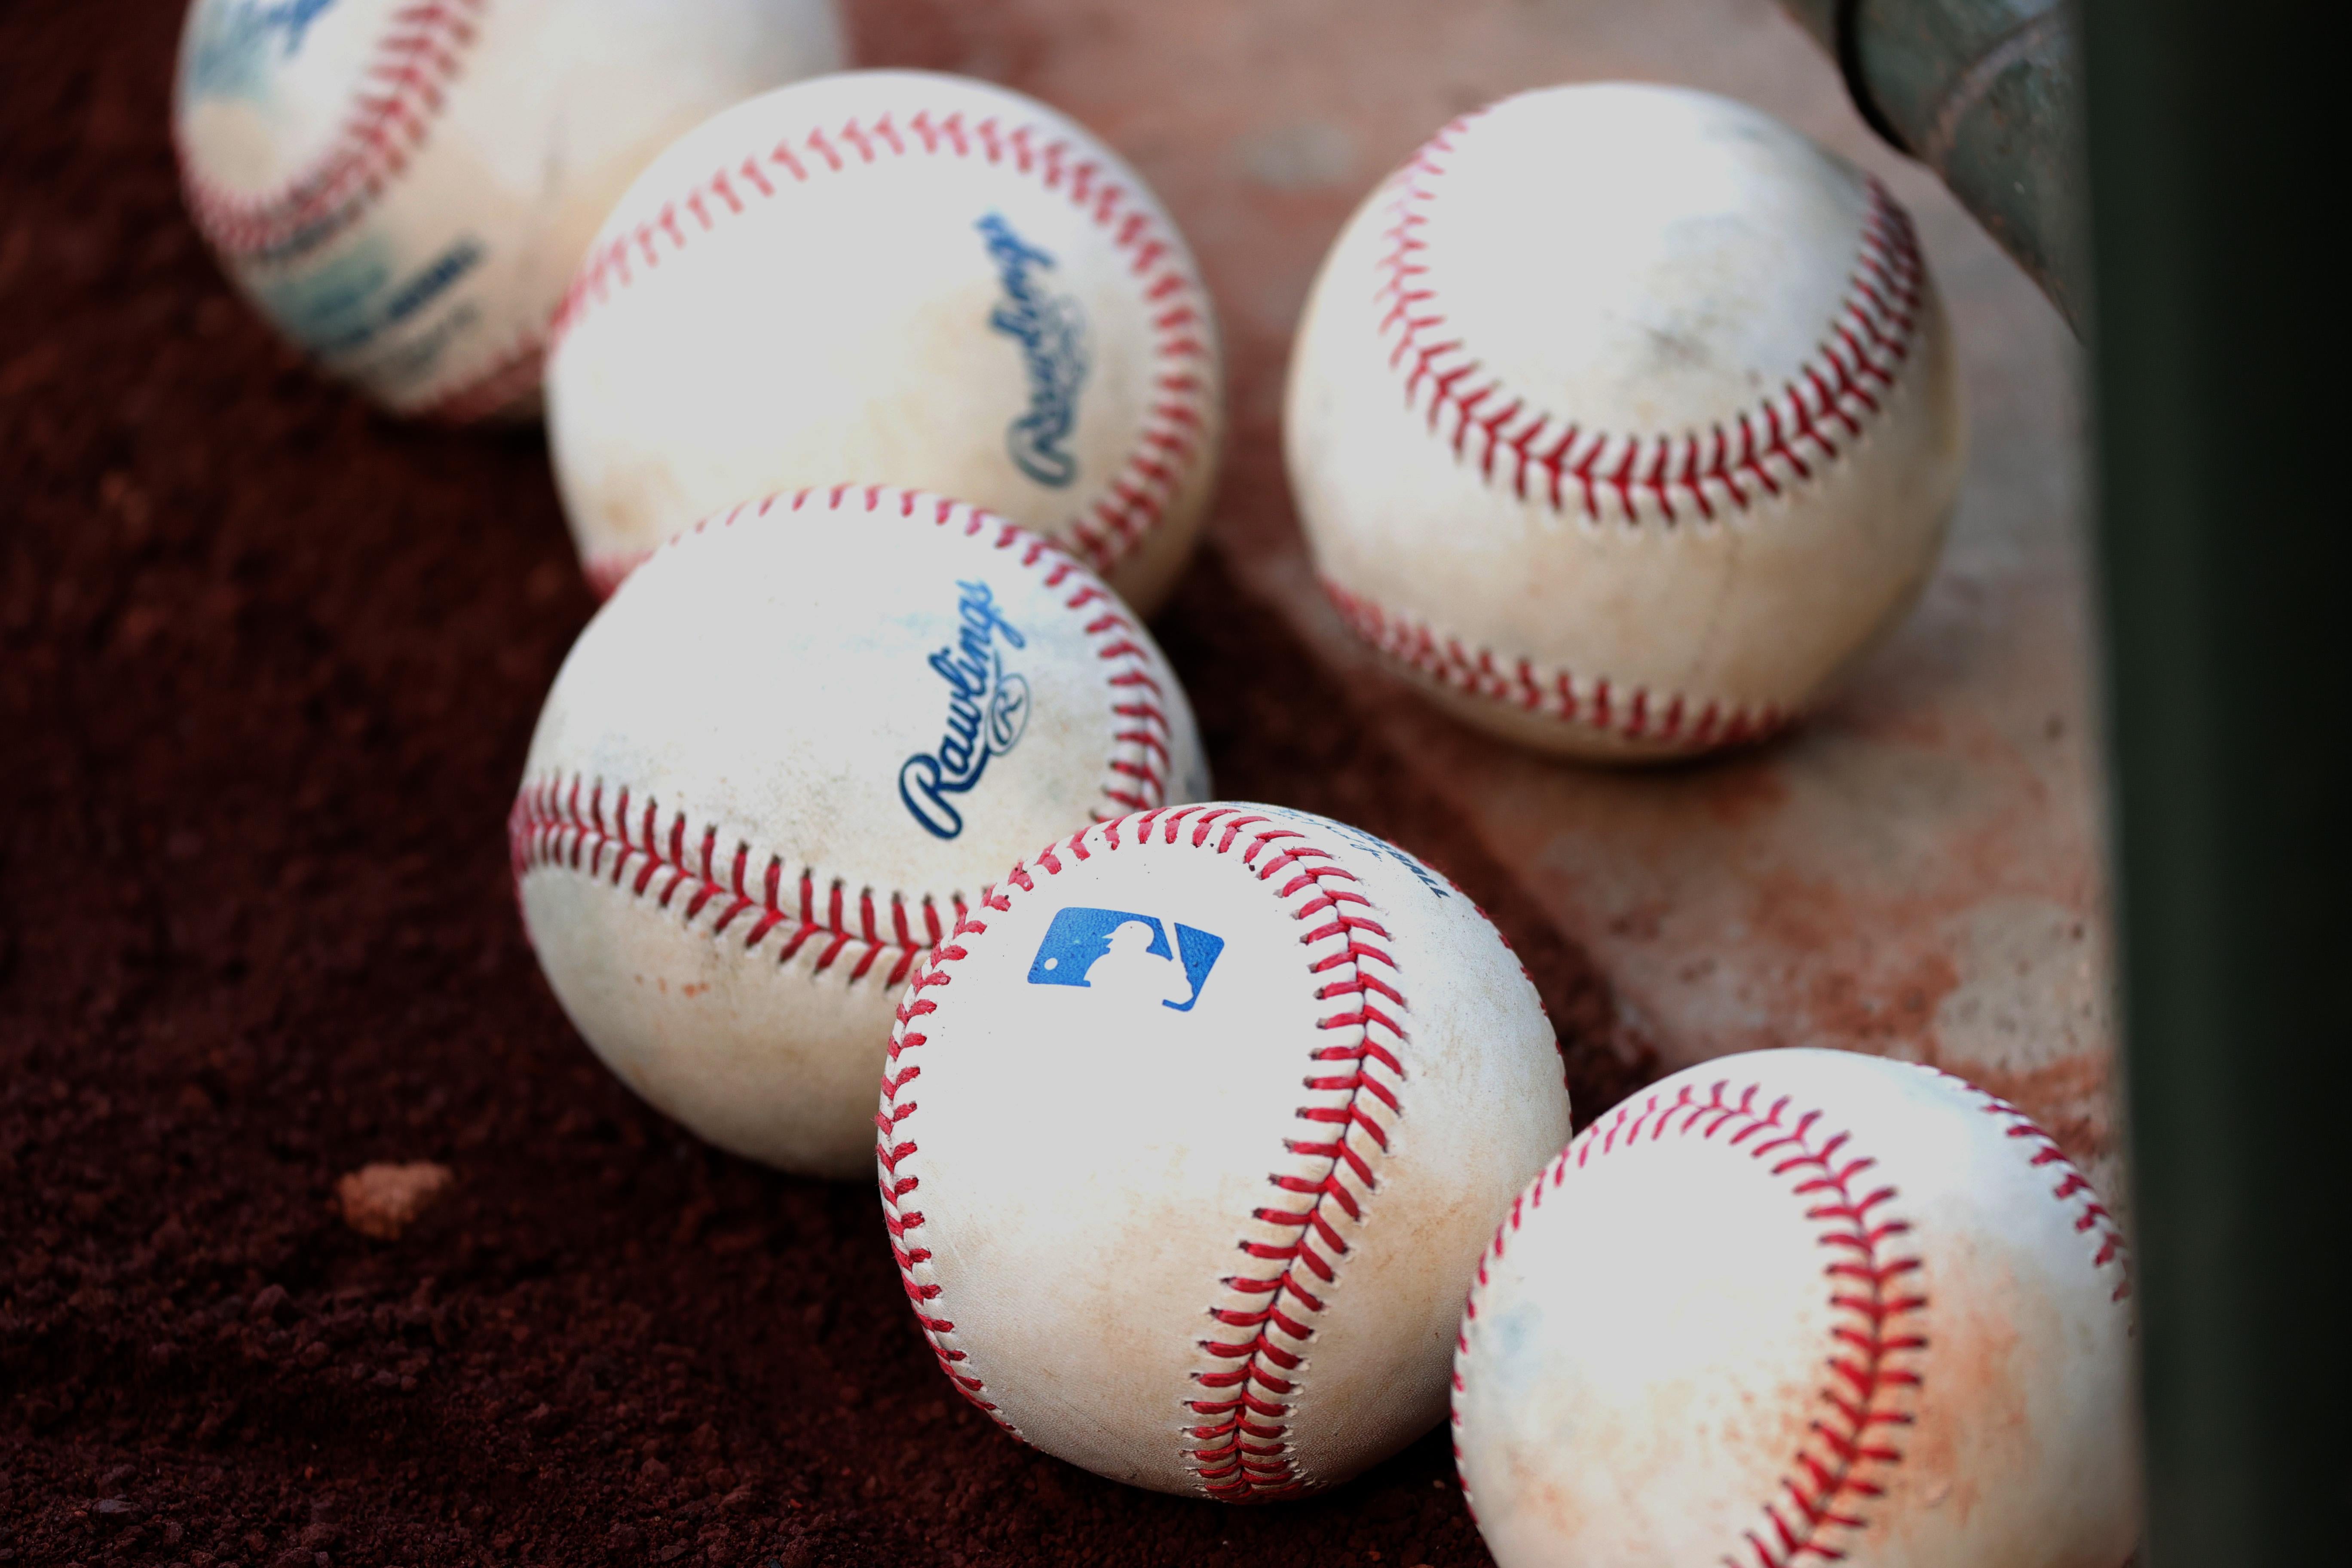 A bunch of baseballs on the ground.